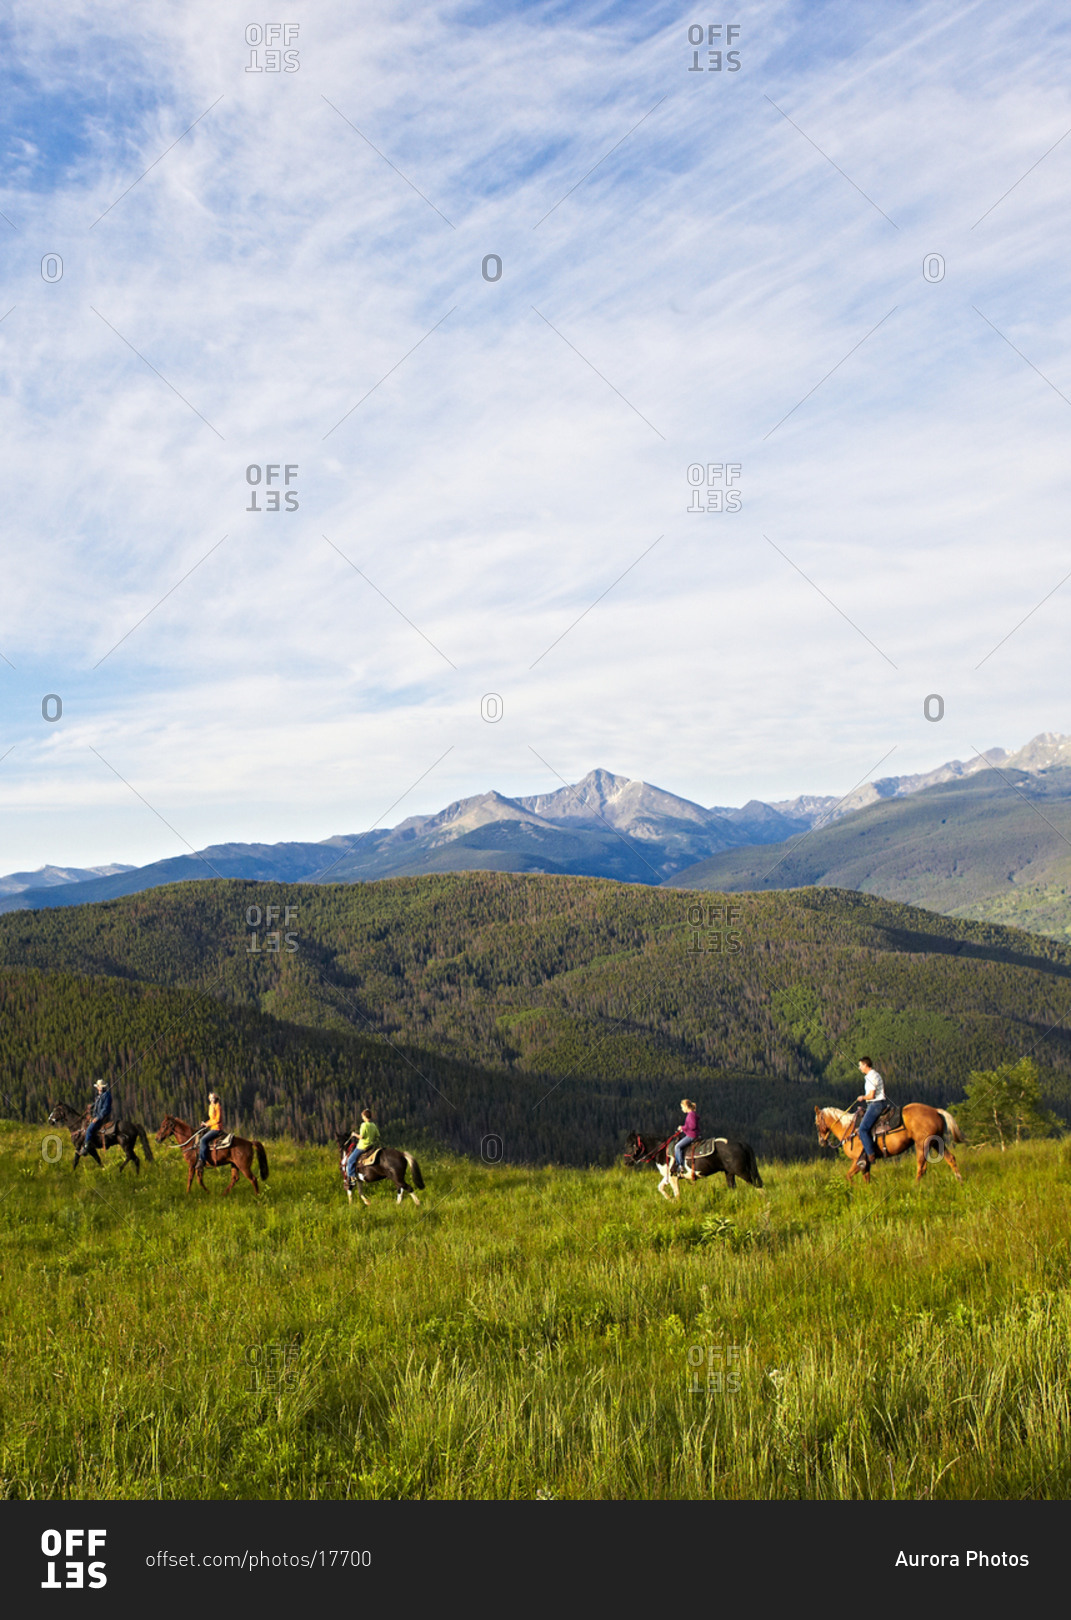 A group of riders enjoys an early morning horseback adventure in a high alpine mountain Summer meadow.